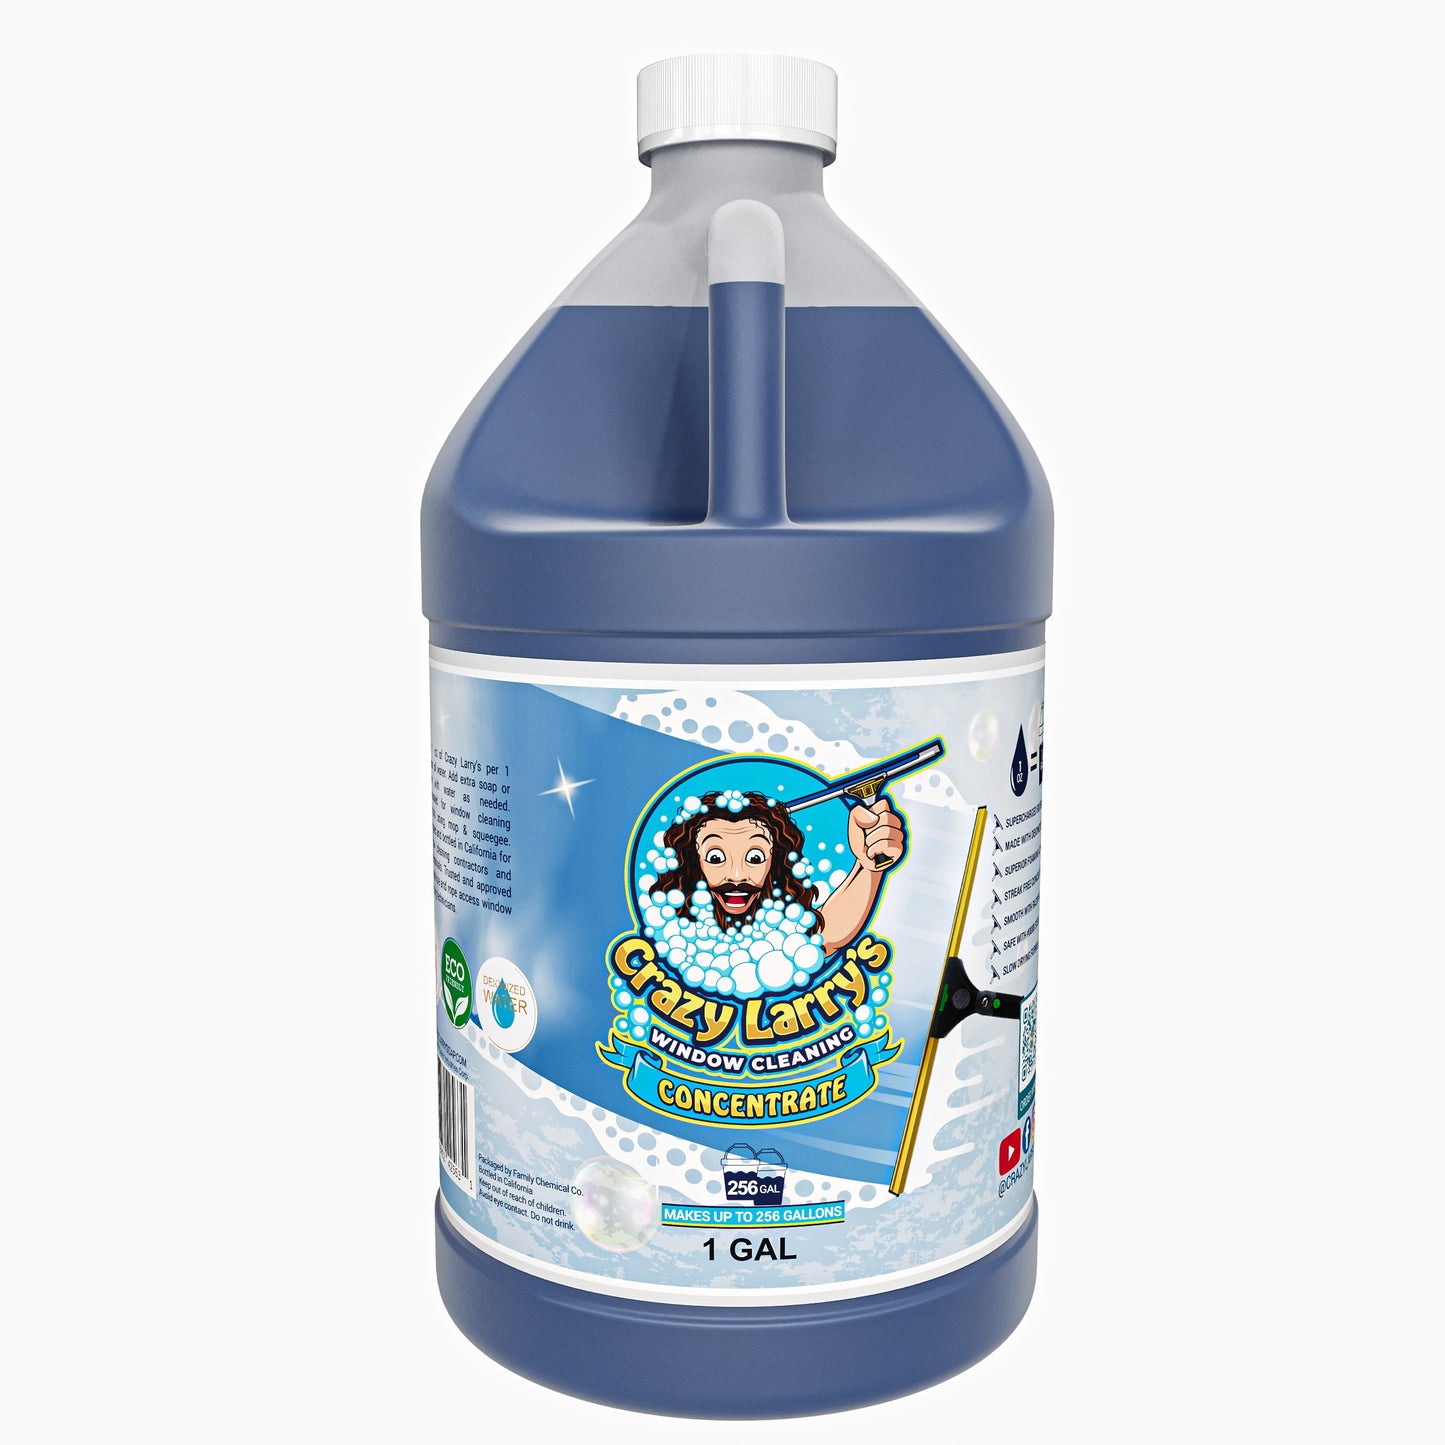 Crazy Larry’s Window Cleaning Concentrate - 1 Gallon